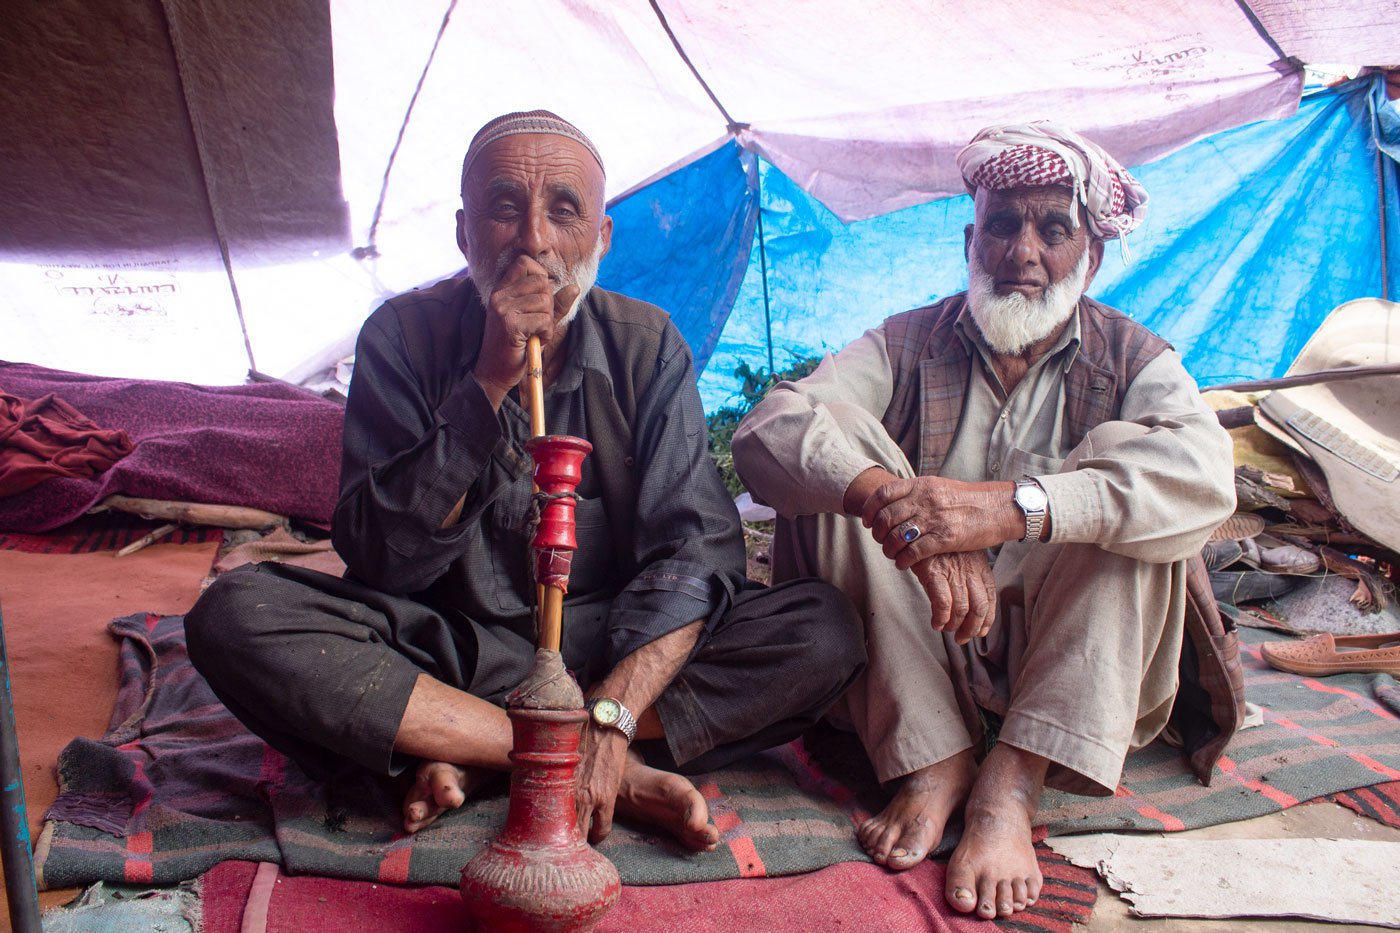 Abdul Latief Bajran (left) migrated out of his village, Peri in Rajouri district, in early May with his 150 animals – sheep, goats, horses and a dog – in search of grazing grounds high up in the mountains of Kashmir. Seated with Mohammad Qasim (right) inside a tent in Wayil near Ganderbal district, waiting to continue his journey